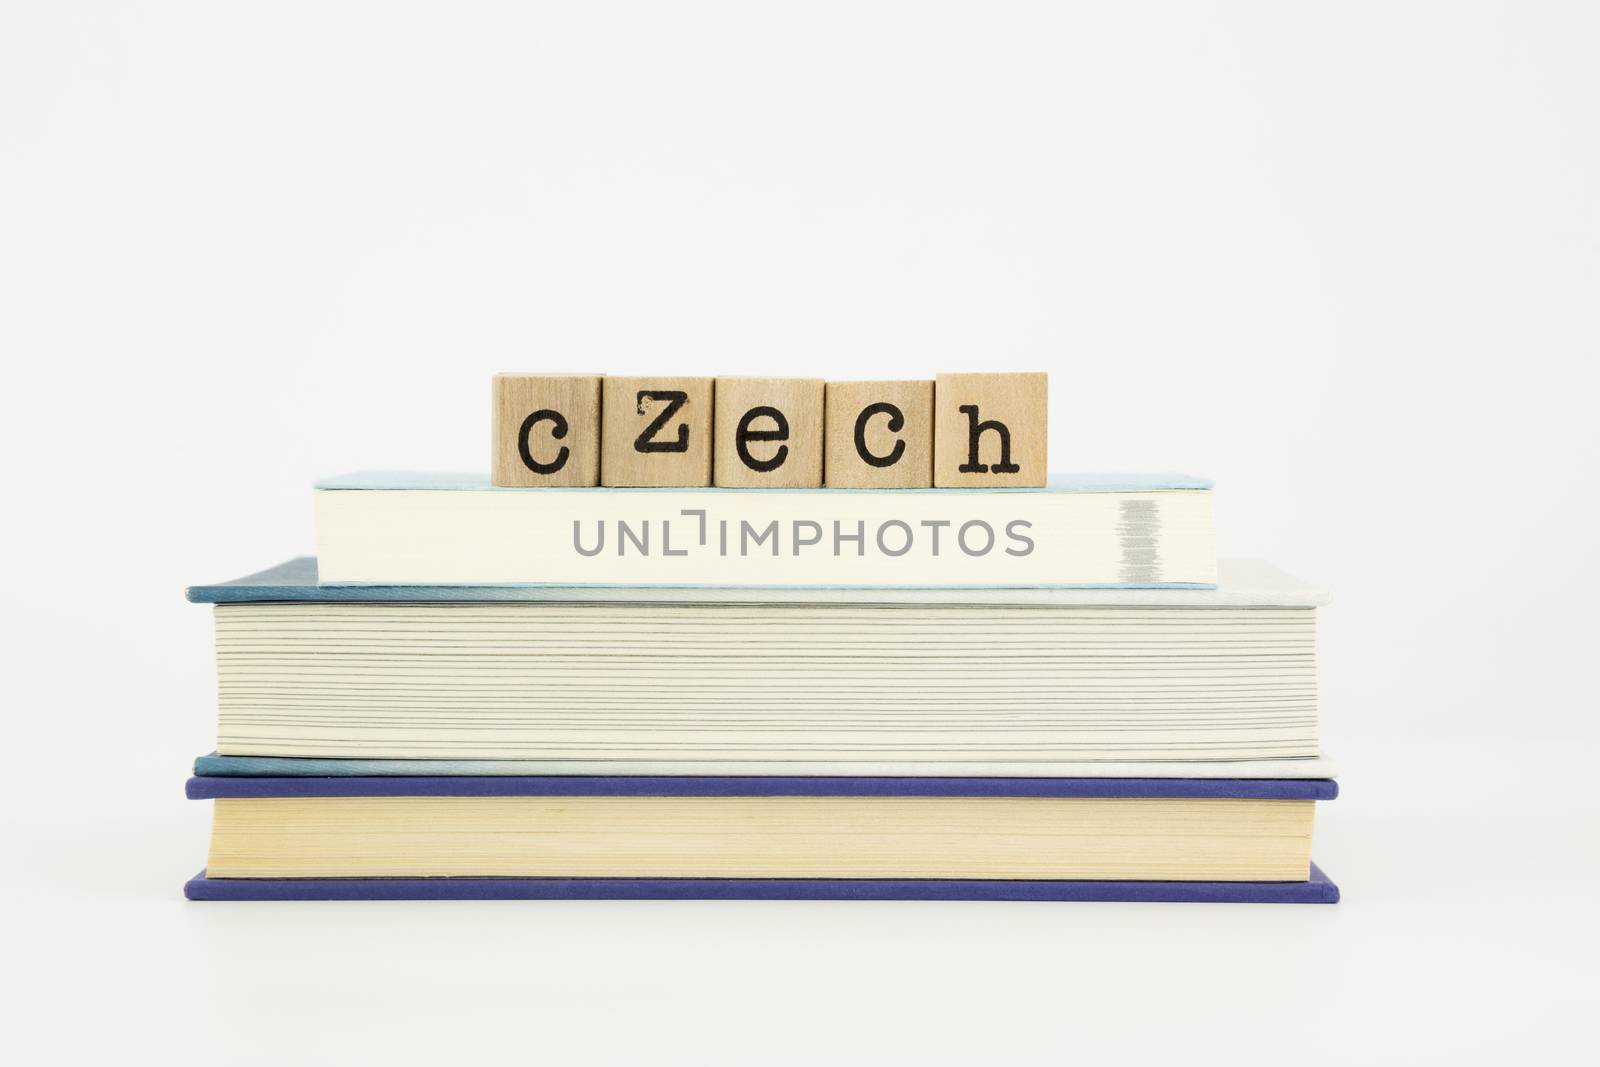 czech language word on wood stamps and books by vinnstock